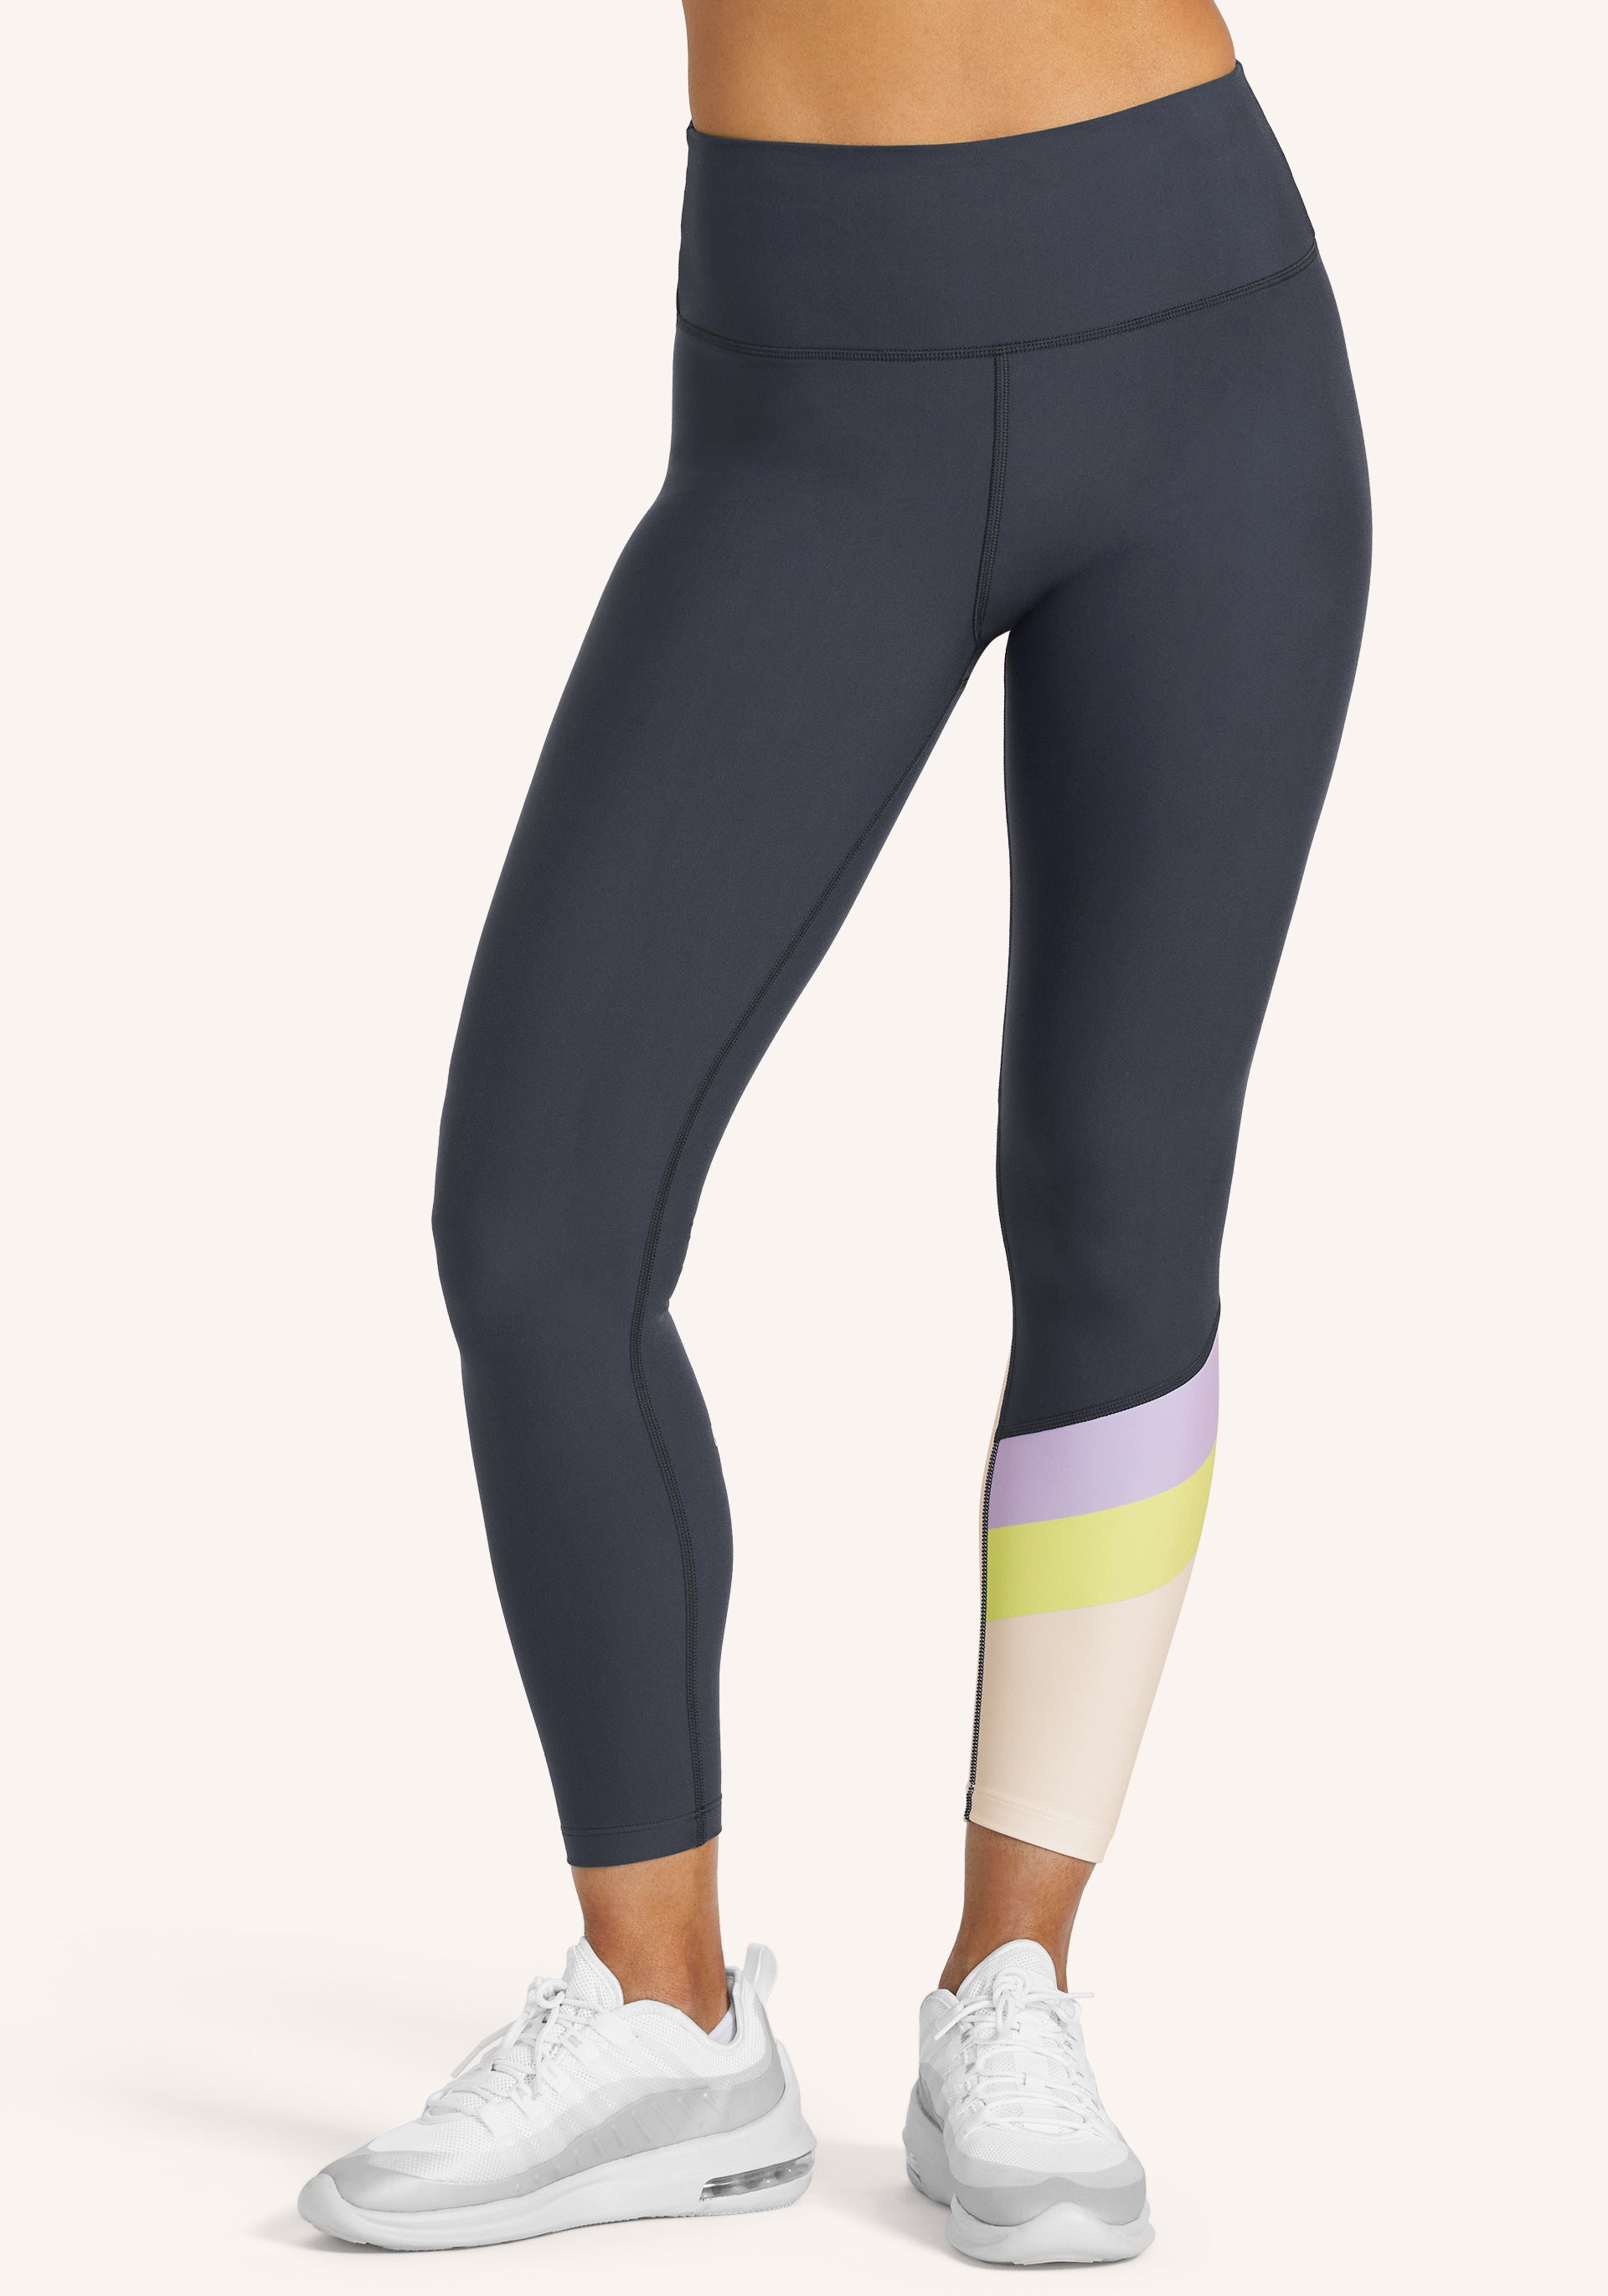 Extra Plus Textured Leggings w/ Pockets – 2 Blondes Apparel